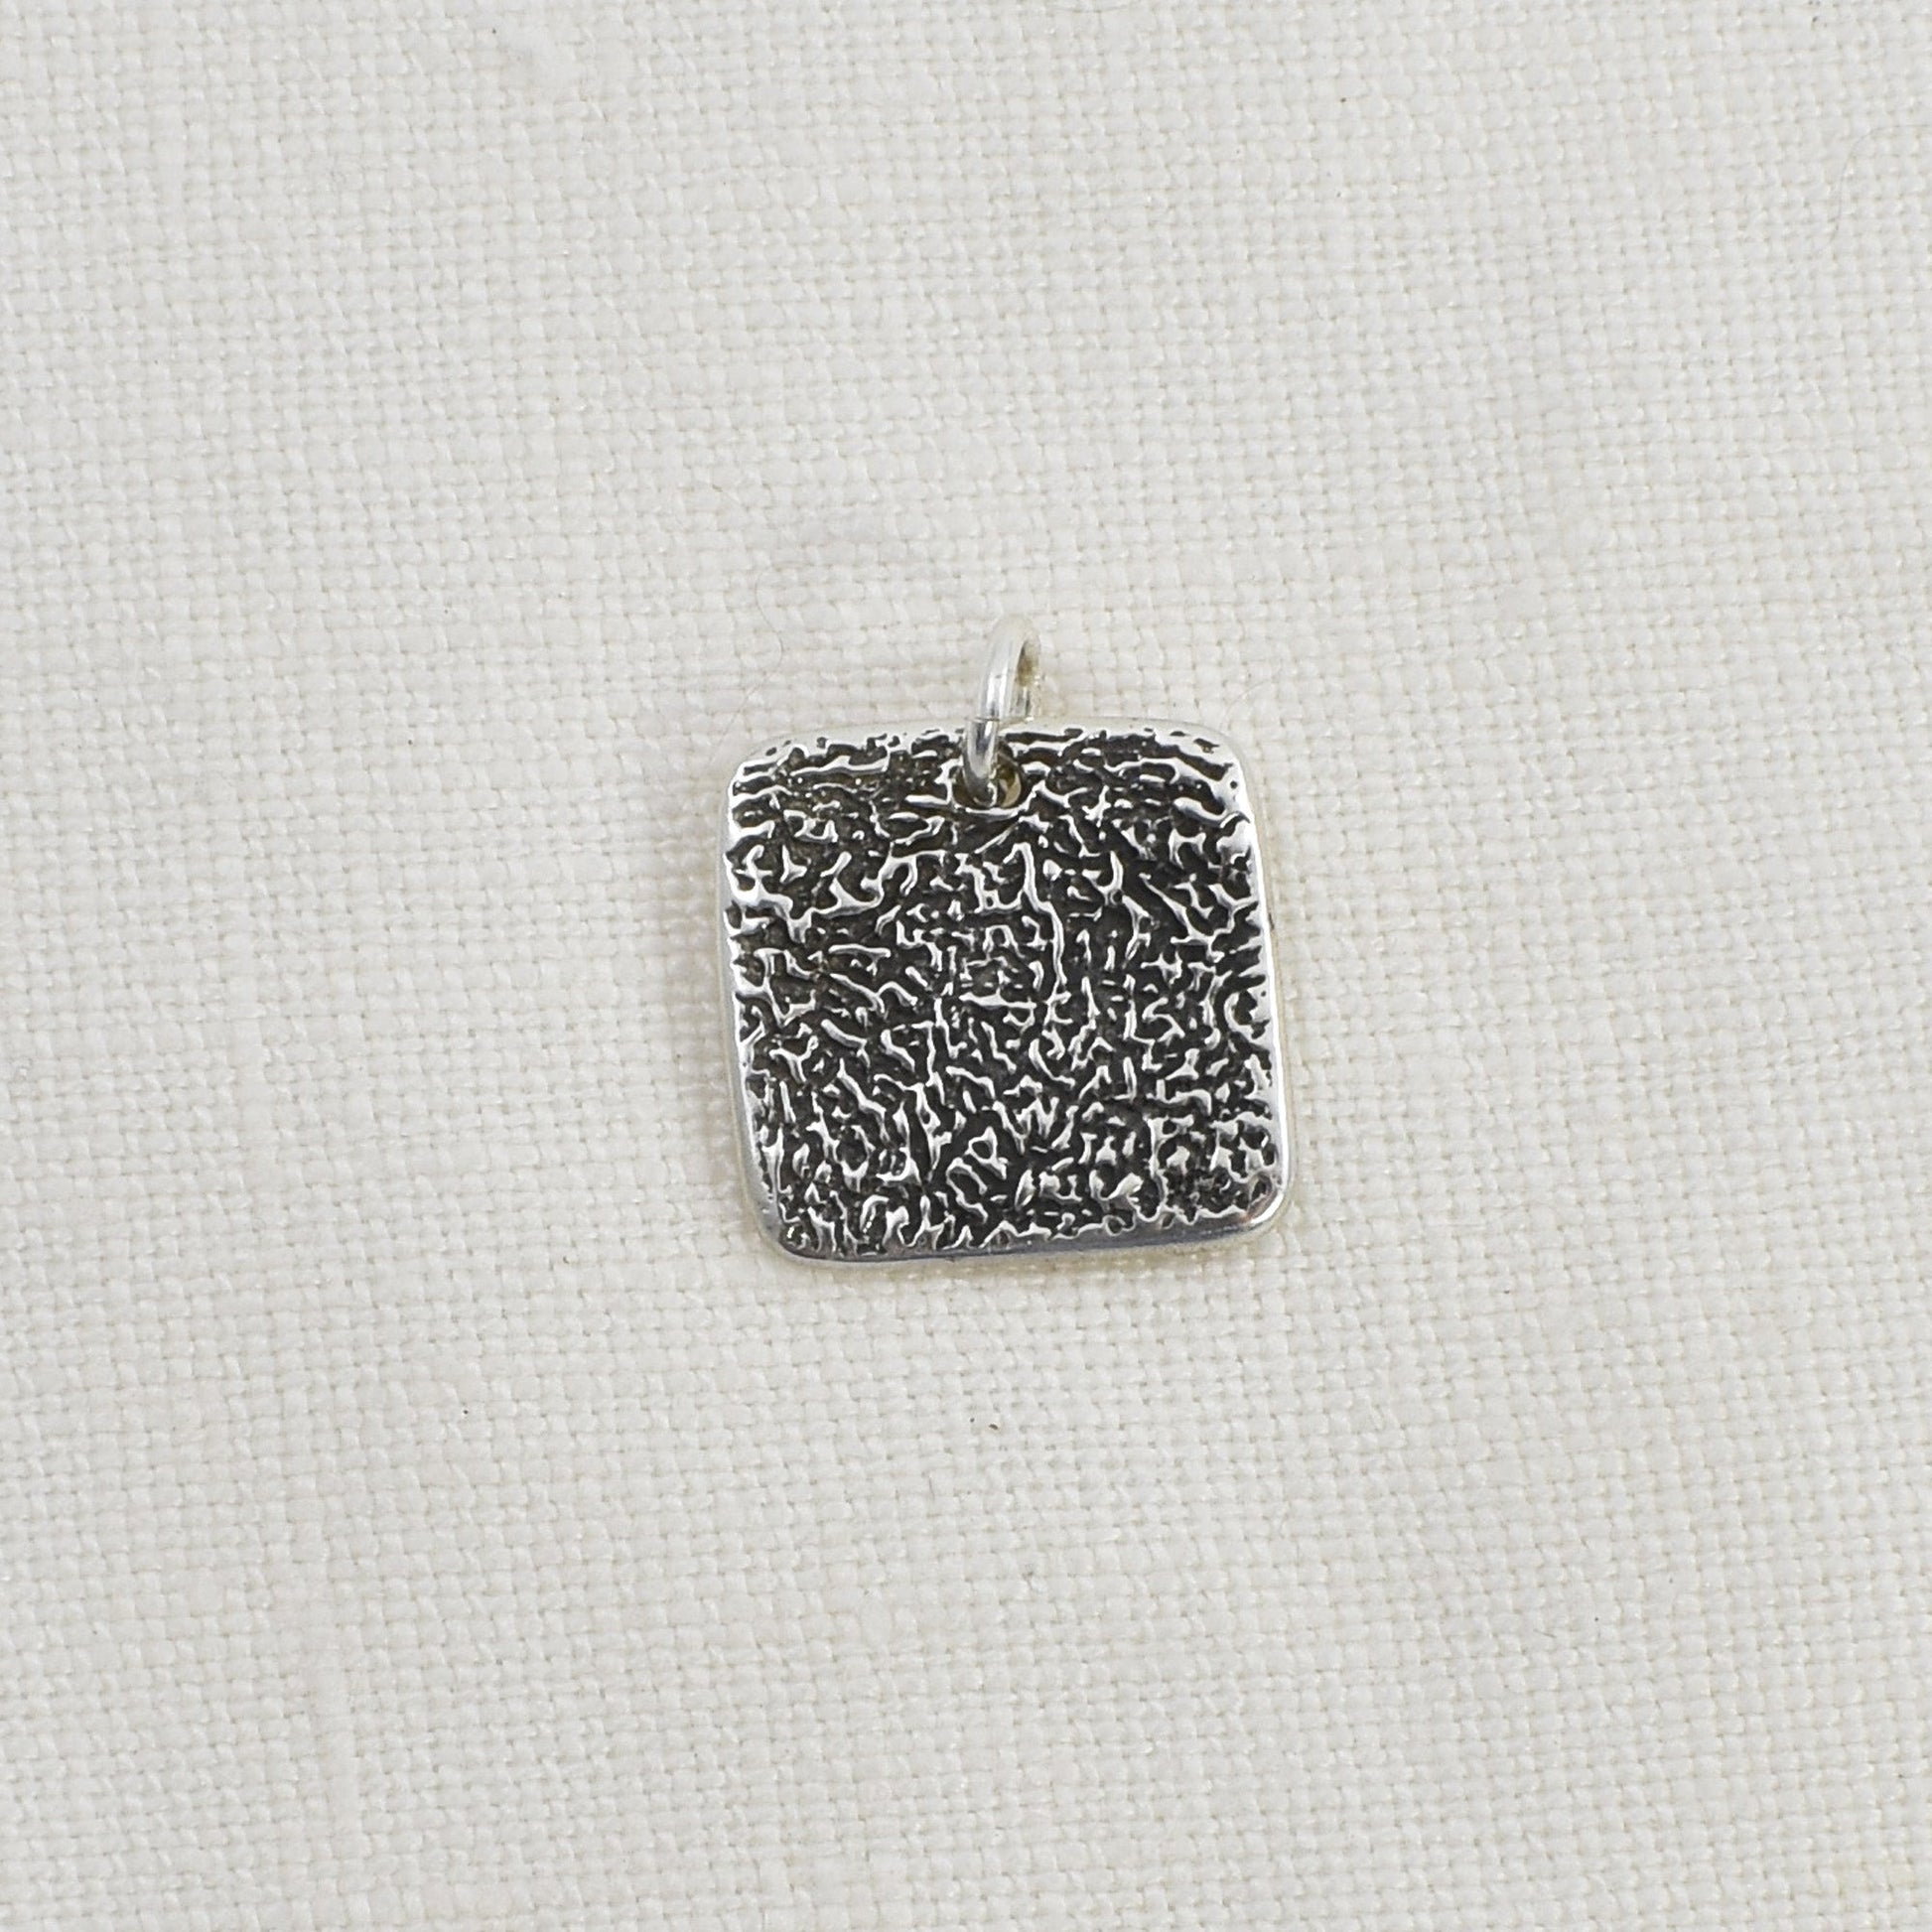 Dog Nose Textured Square Pendant with black patina showing example of pendant engraved with texture